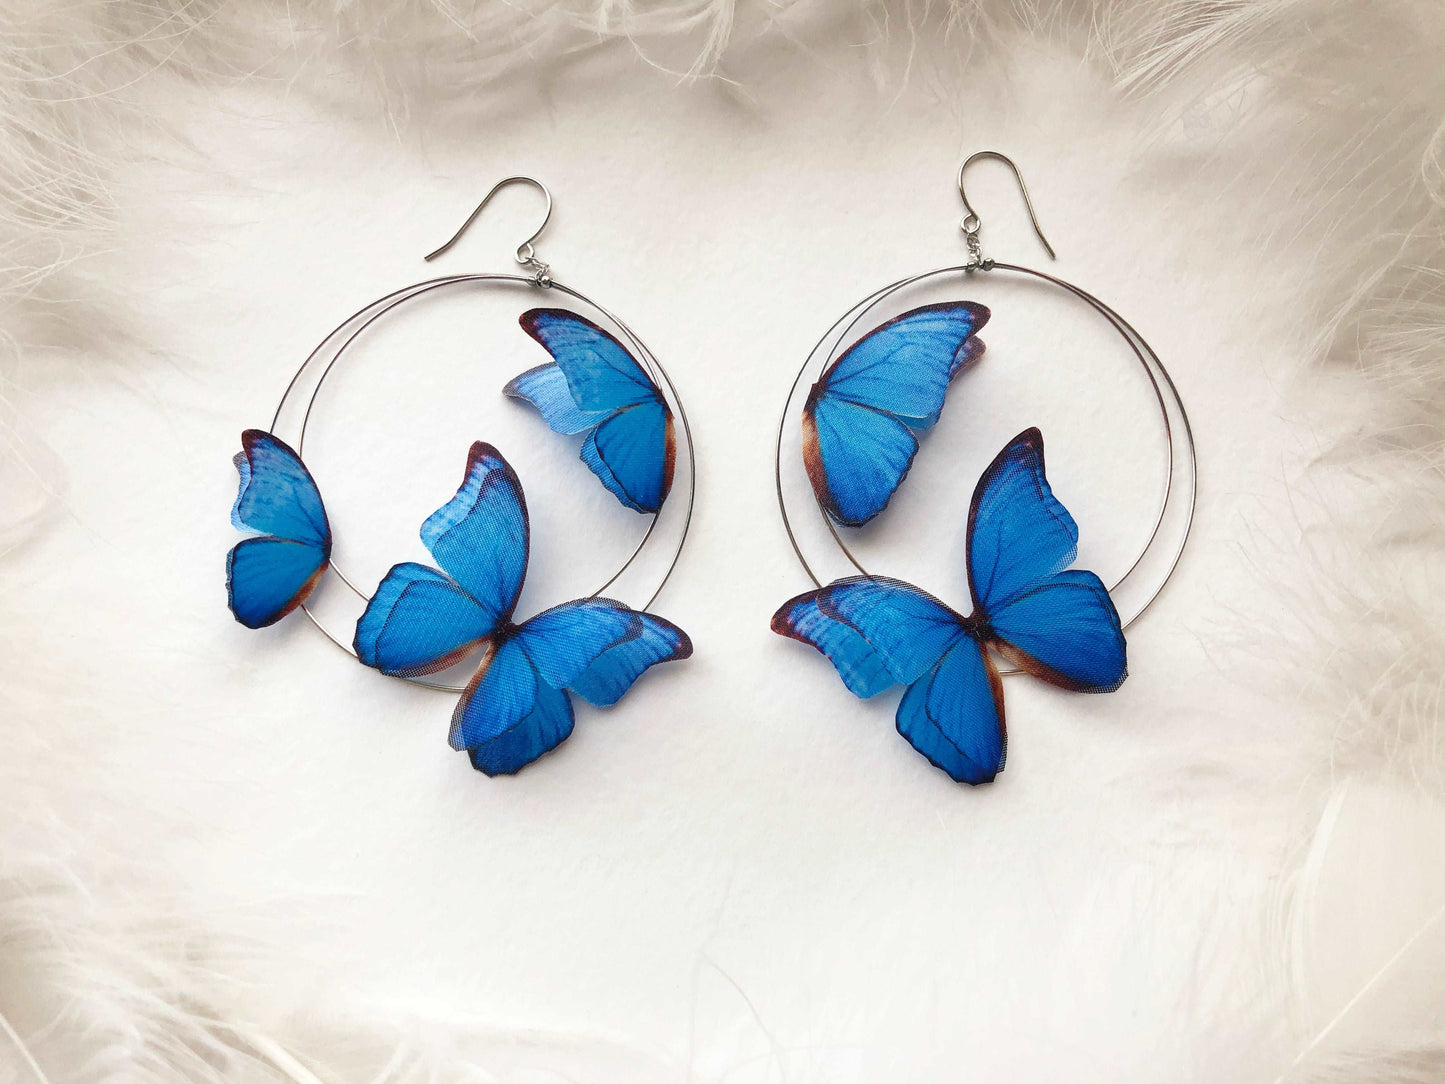 Hoop Earrings with Blue Butterflies on White Feathers Background